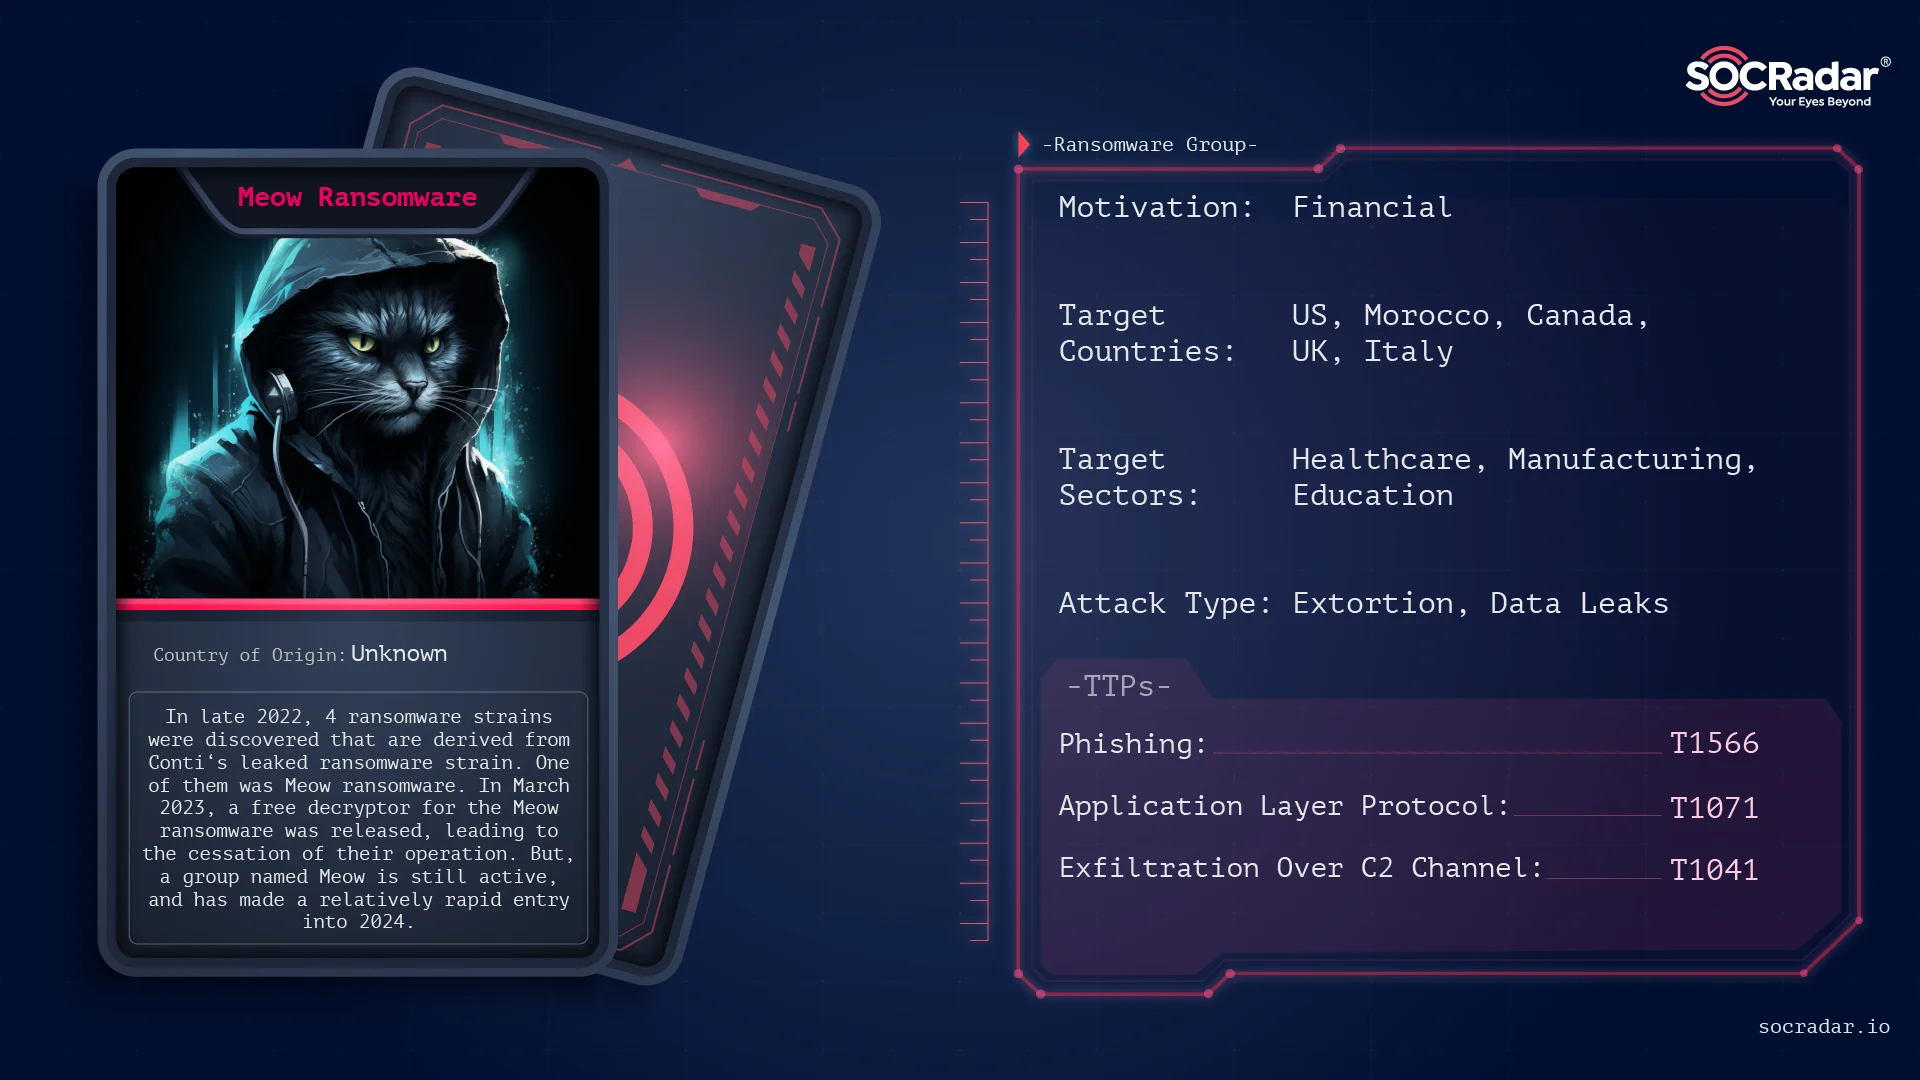 Threat Actor Card for Meow Ransomware